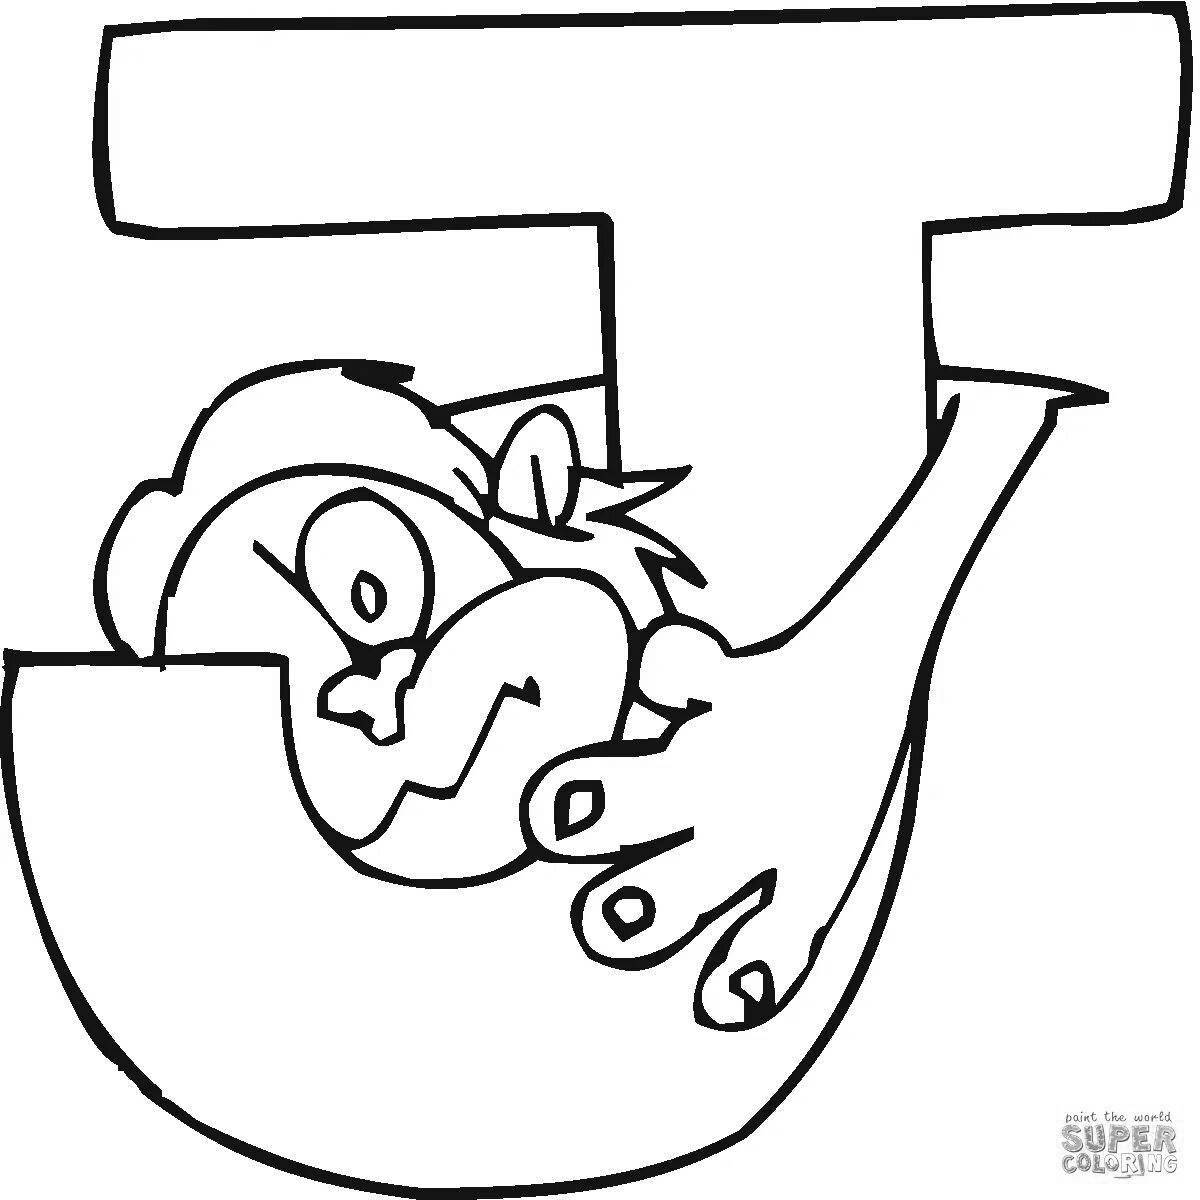 Color-frenzy letter j coloring page